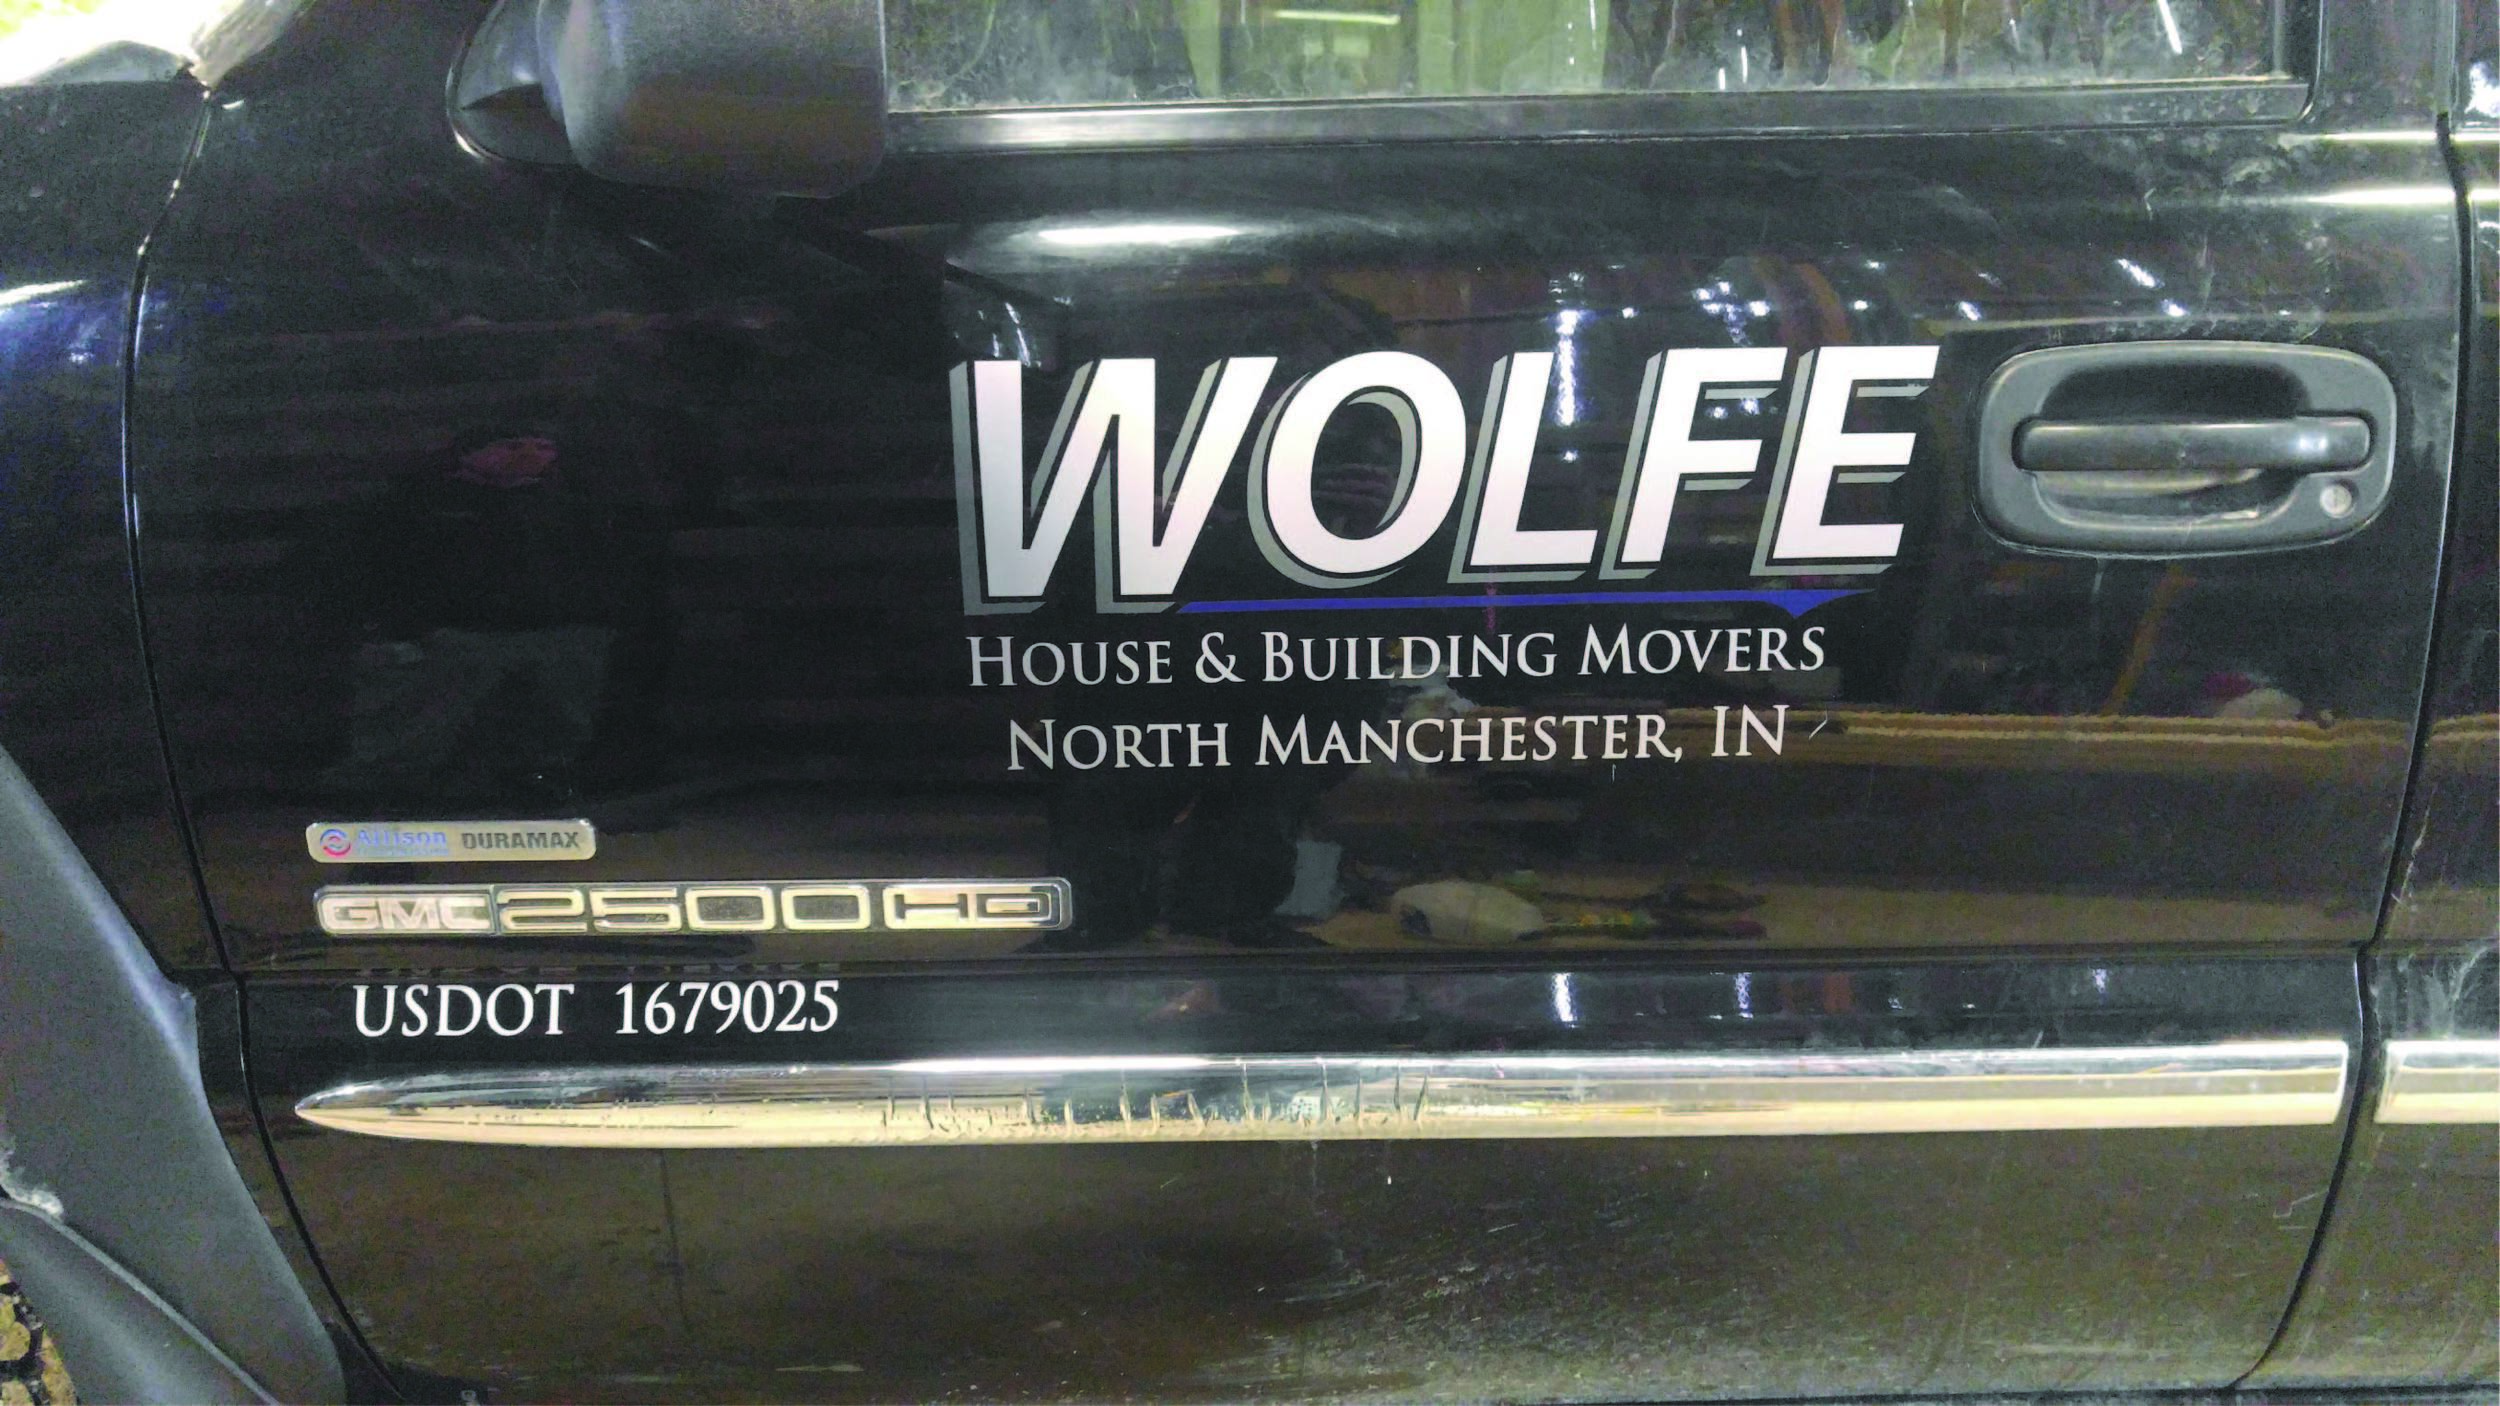 Wolfe House Movers North Manchester Indiana House Moving Company JPG.jpg